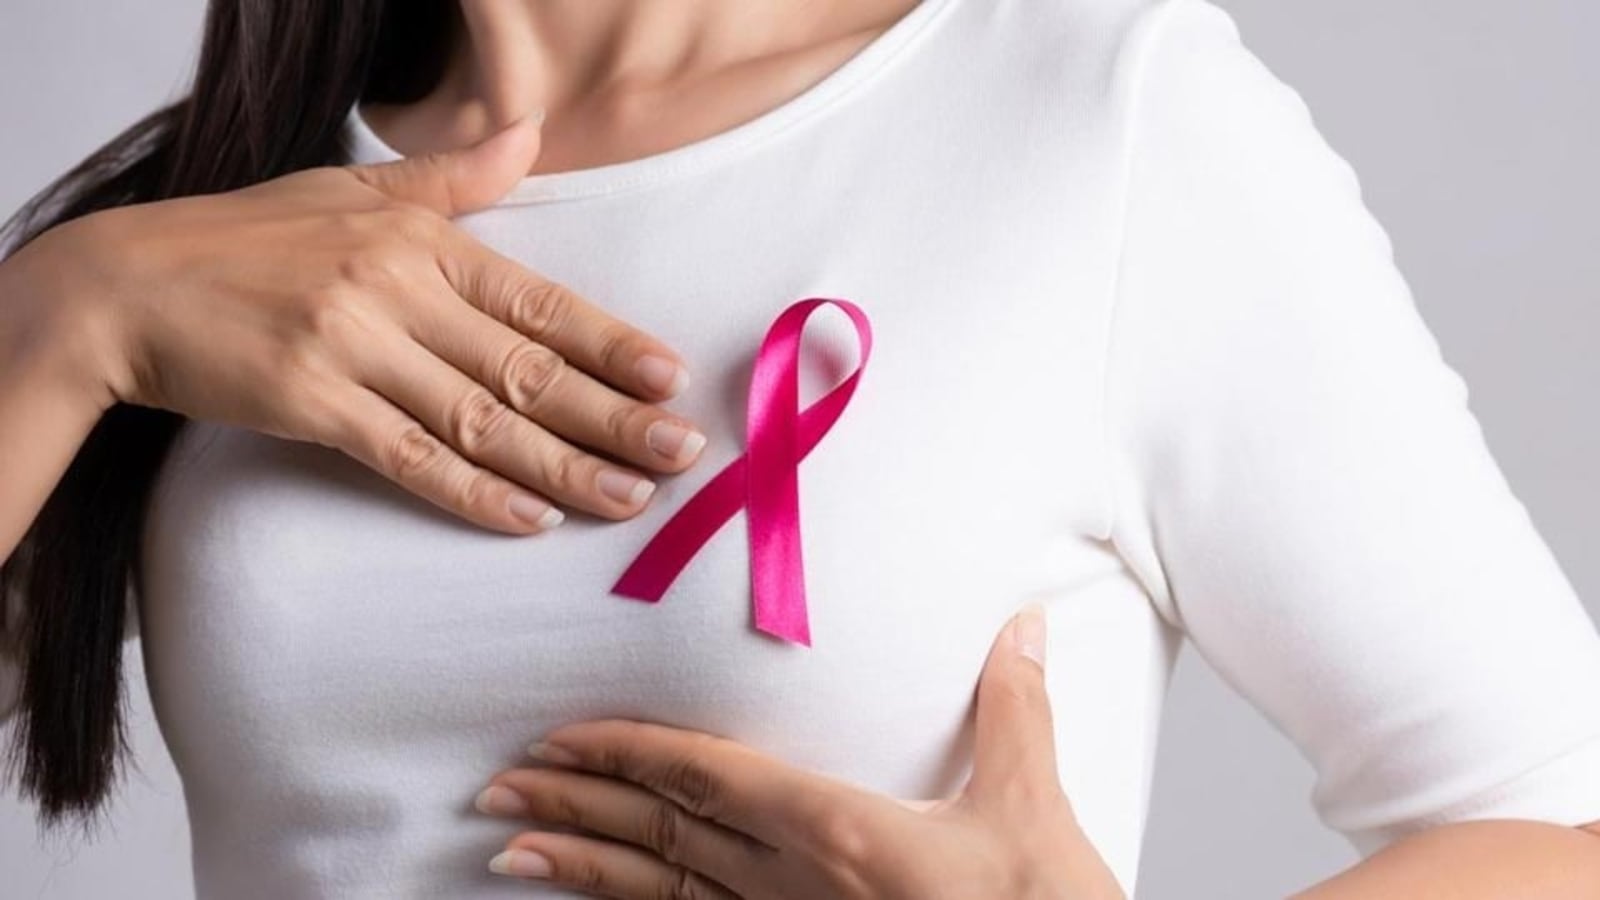 Can having more kids increase breast cancer risk? Oncologist shares insights | Health